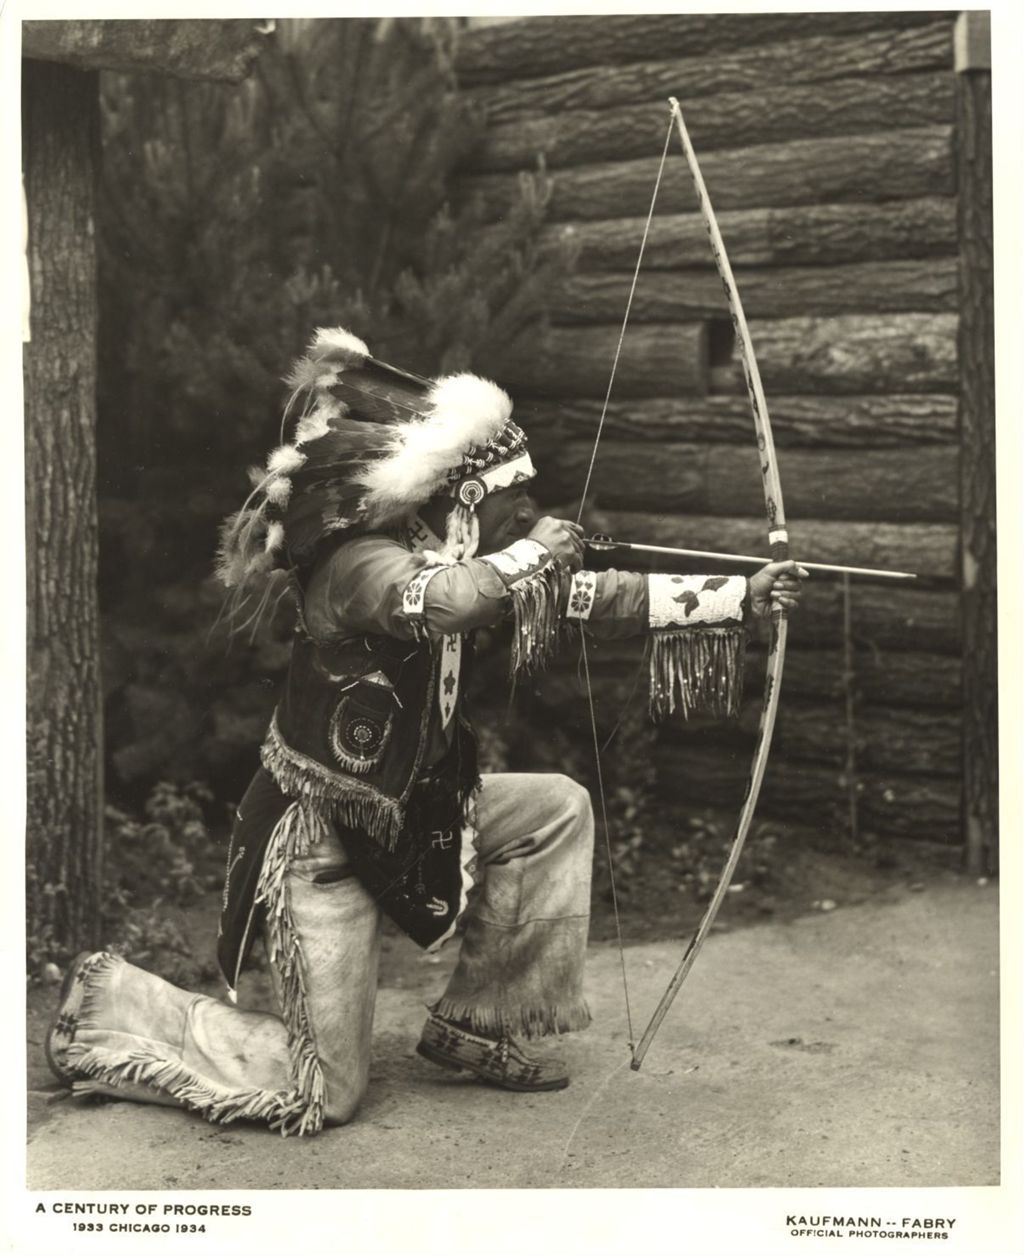 Miniature of American Indian demonstrating the use of a bow and arrow at the Indian Village